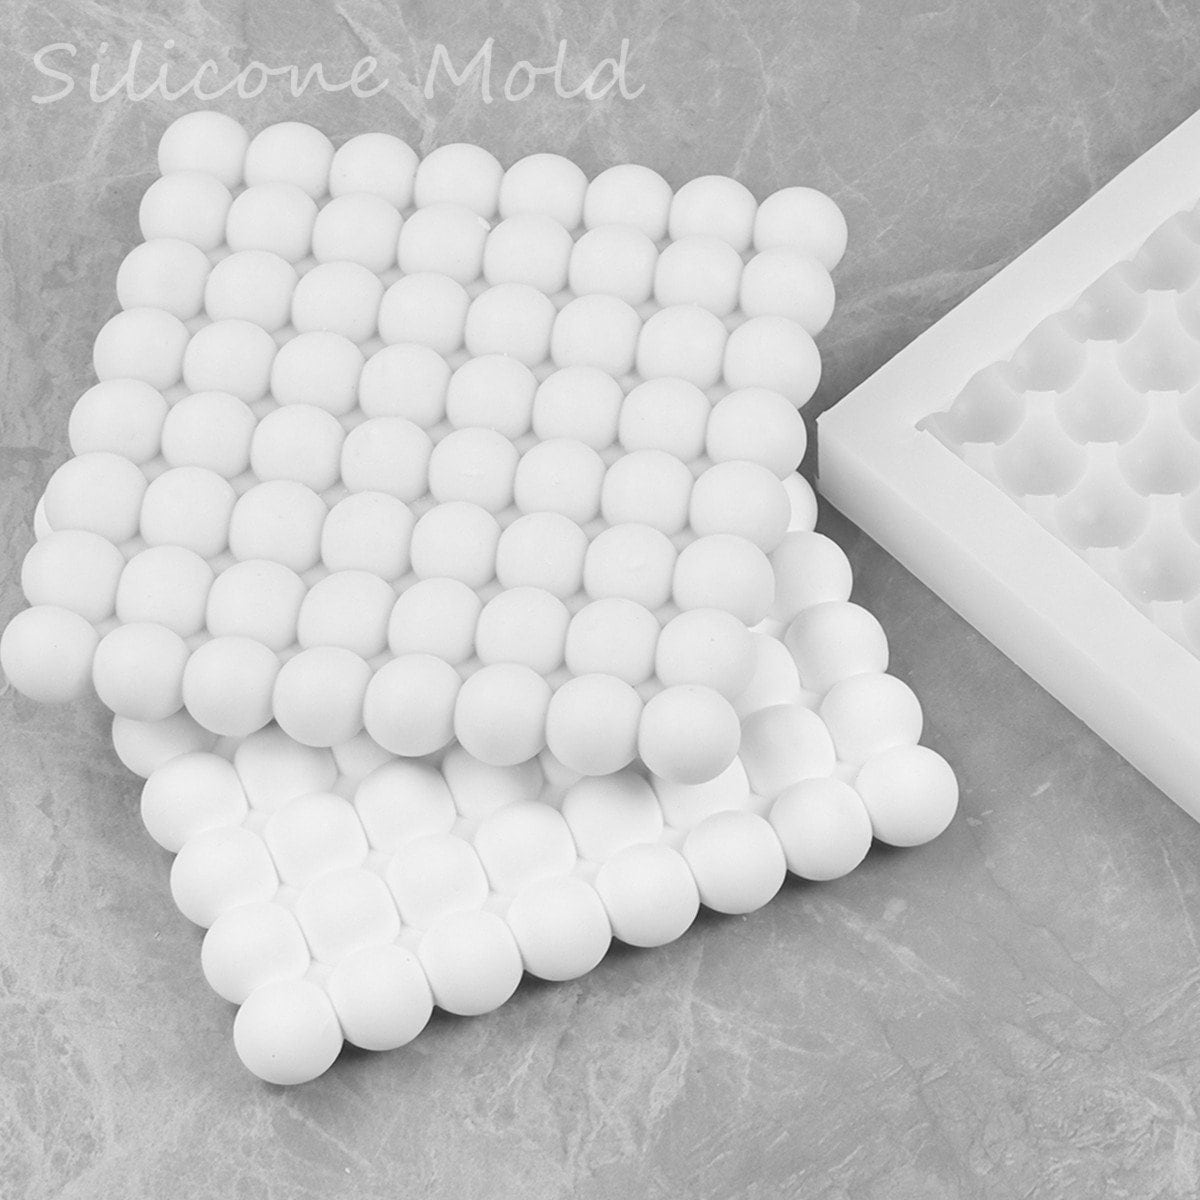 Hollow Dome Silicone Mold (2 Cavity), Hollow Ball Mold, Flexible Hal, MiniatureSweet, Kawaii Resin Crafts, Decoden Cabochons Supplies